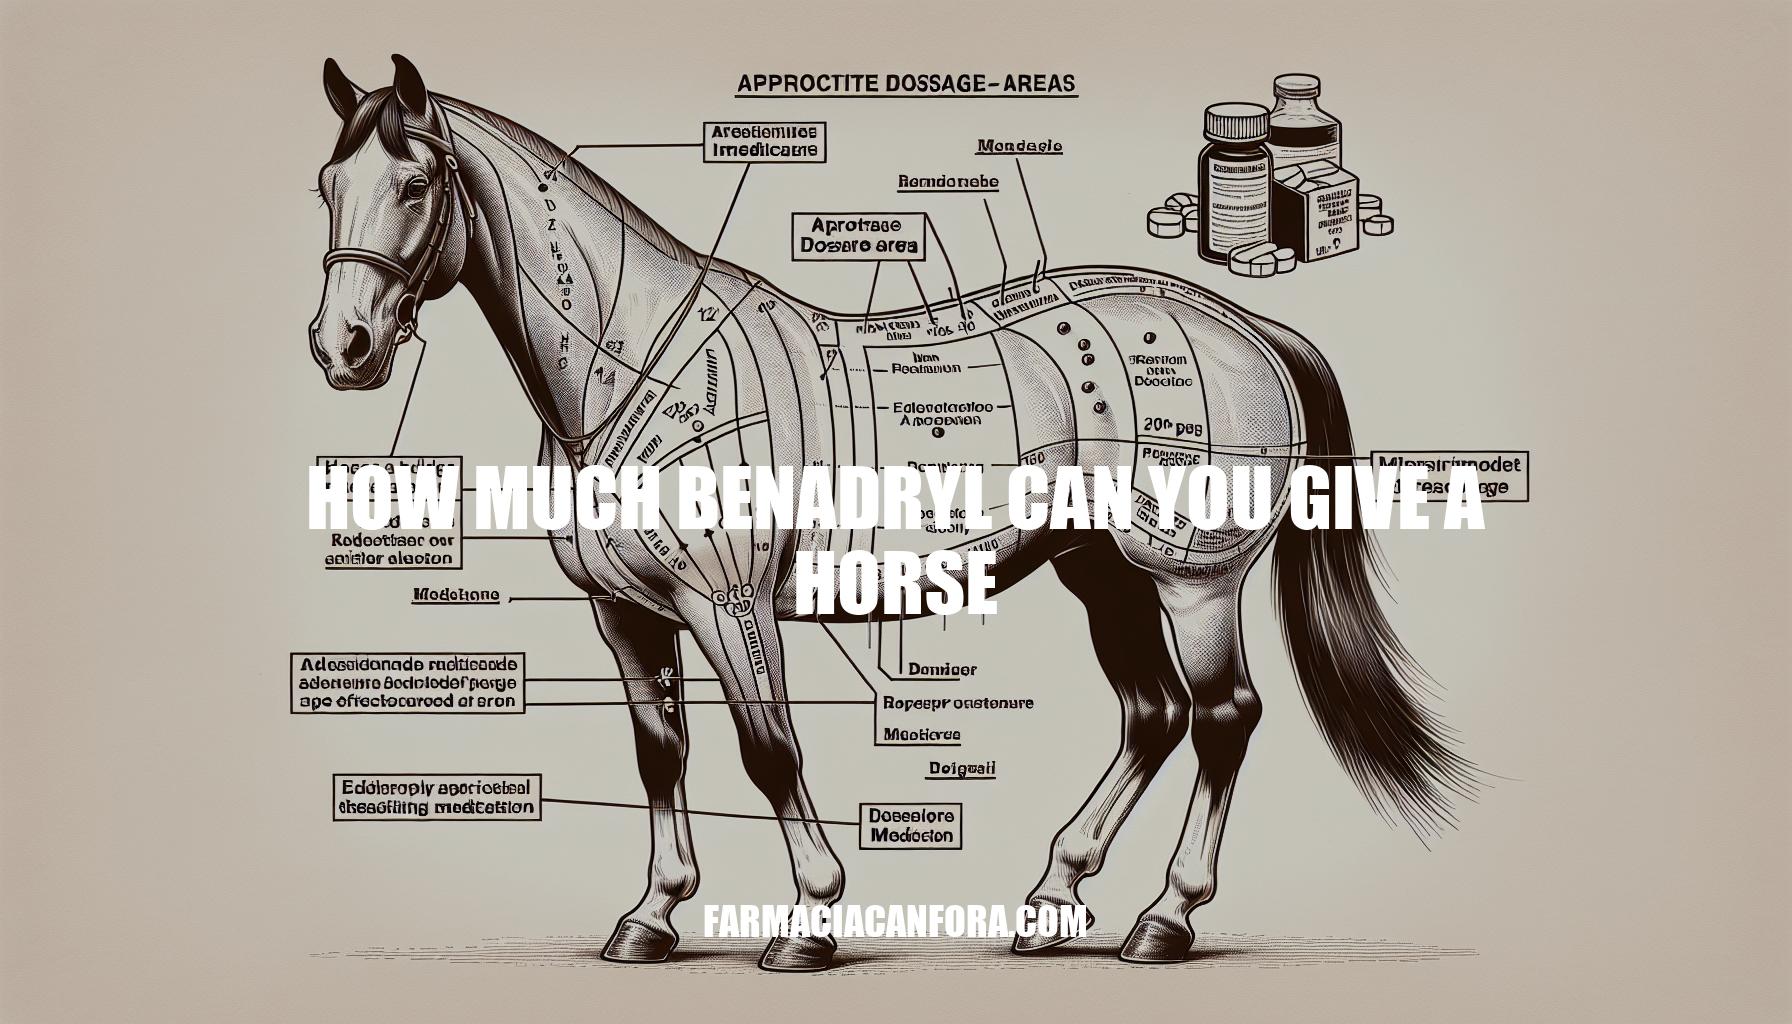 Dosage Guidelines: How Much Benadryl Can You Give a Horse